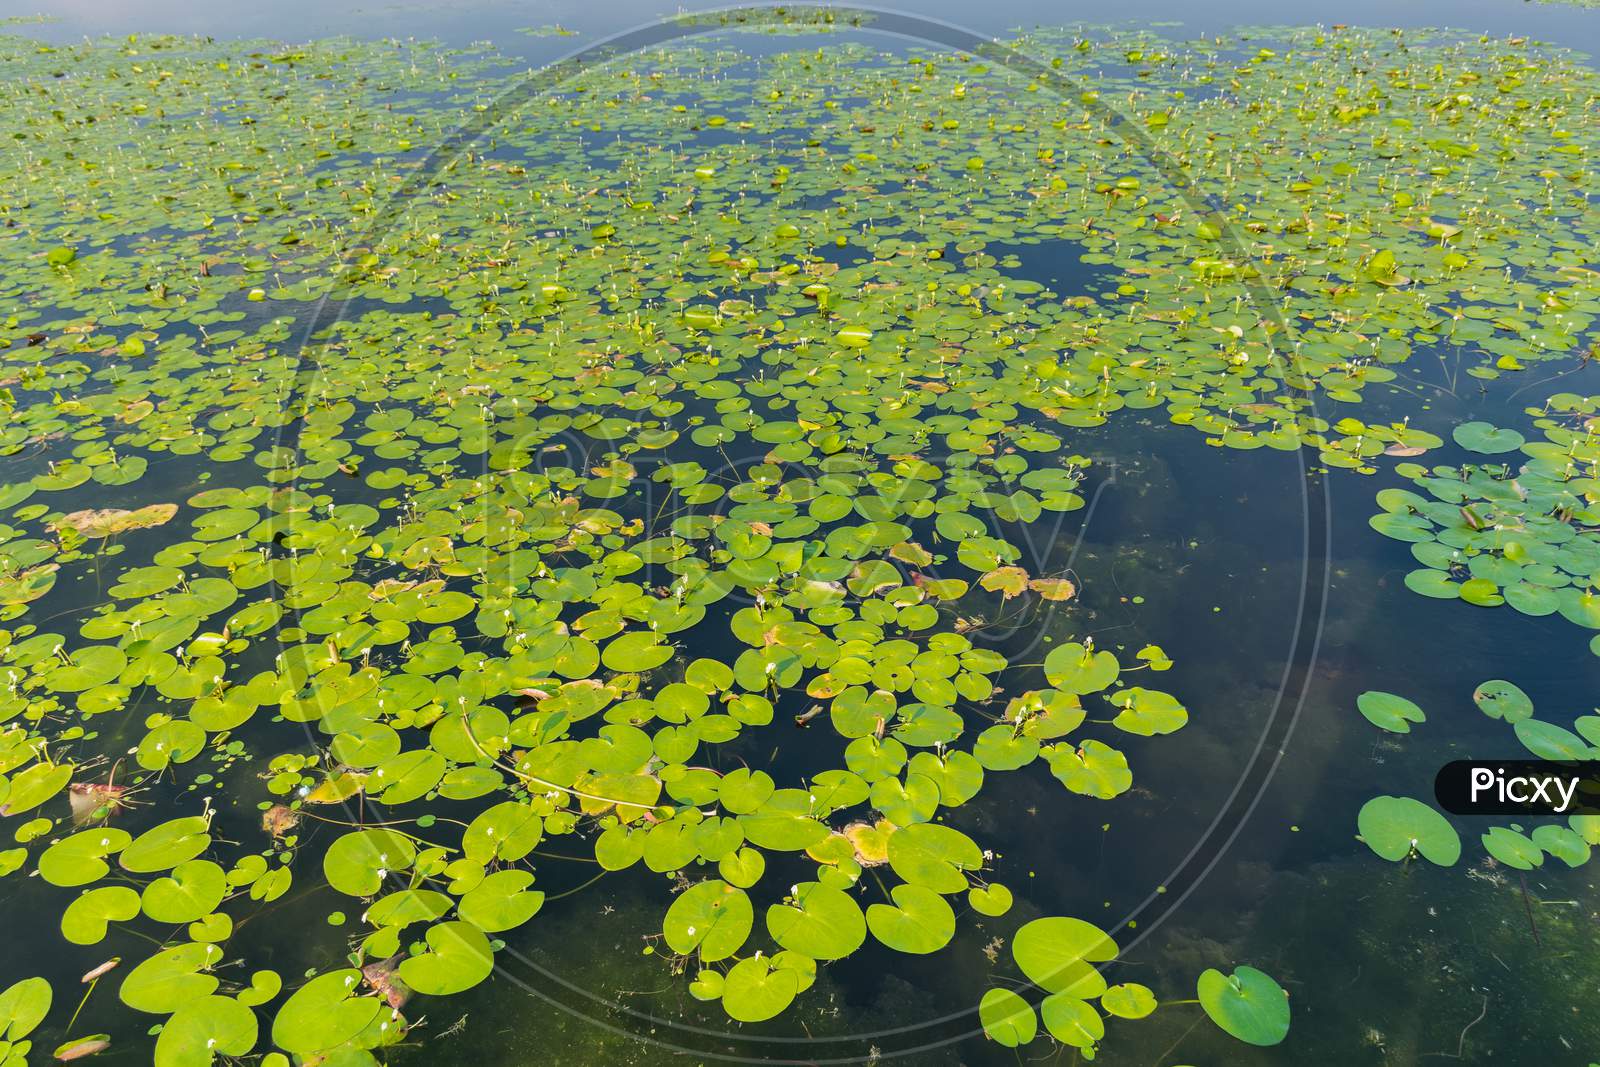 High Angle Panoramic Landscape View Of A Pond Of Lotus Flowers At Kaas Plateau - Valley Of Flowers, Satata, Maharashtra, India